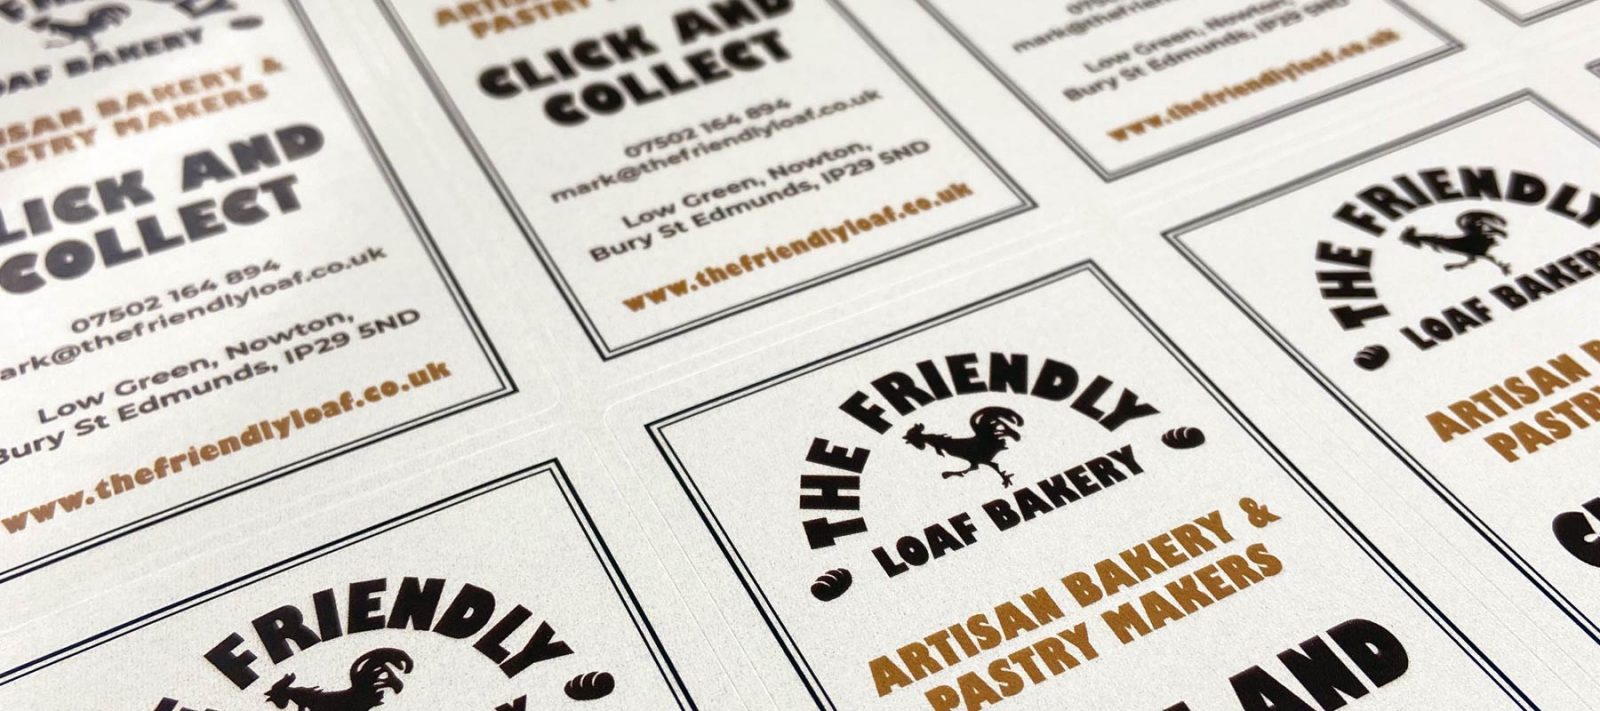 Label and Stickers, Designed and Printed for The Friendly Loaf Bakery in Bury St Edmunds